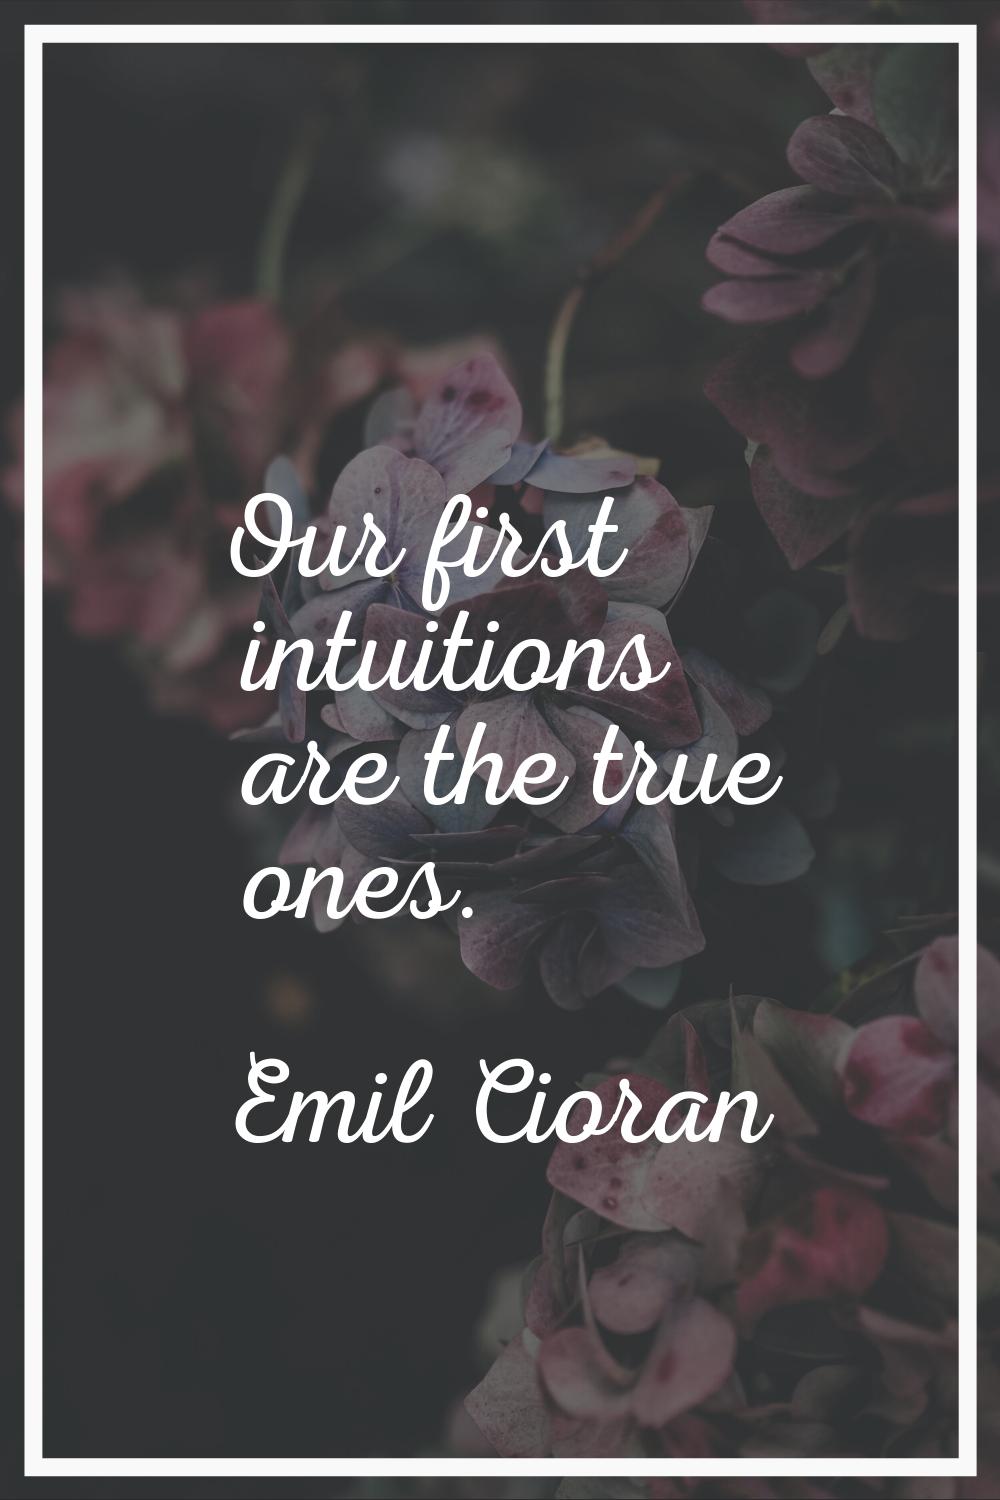 Our first intuitions are the true ones.